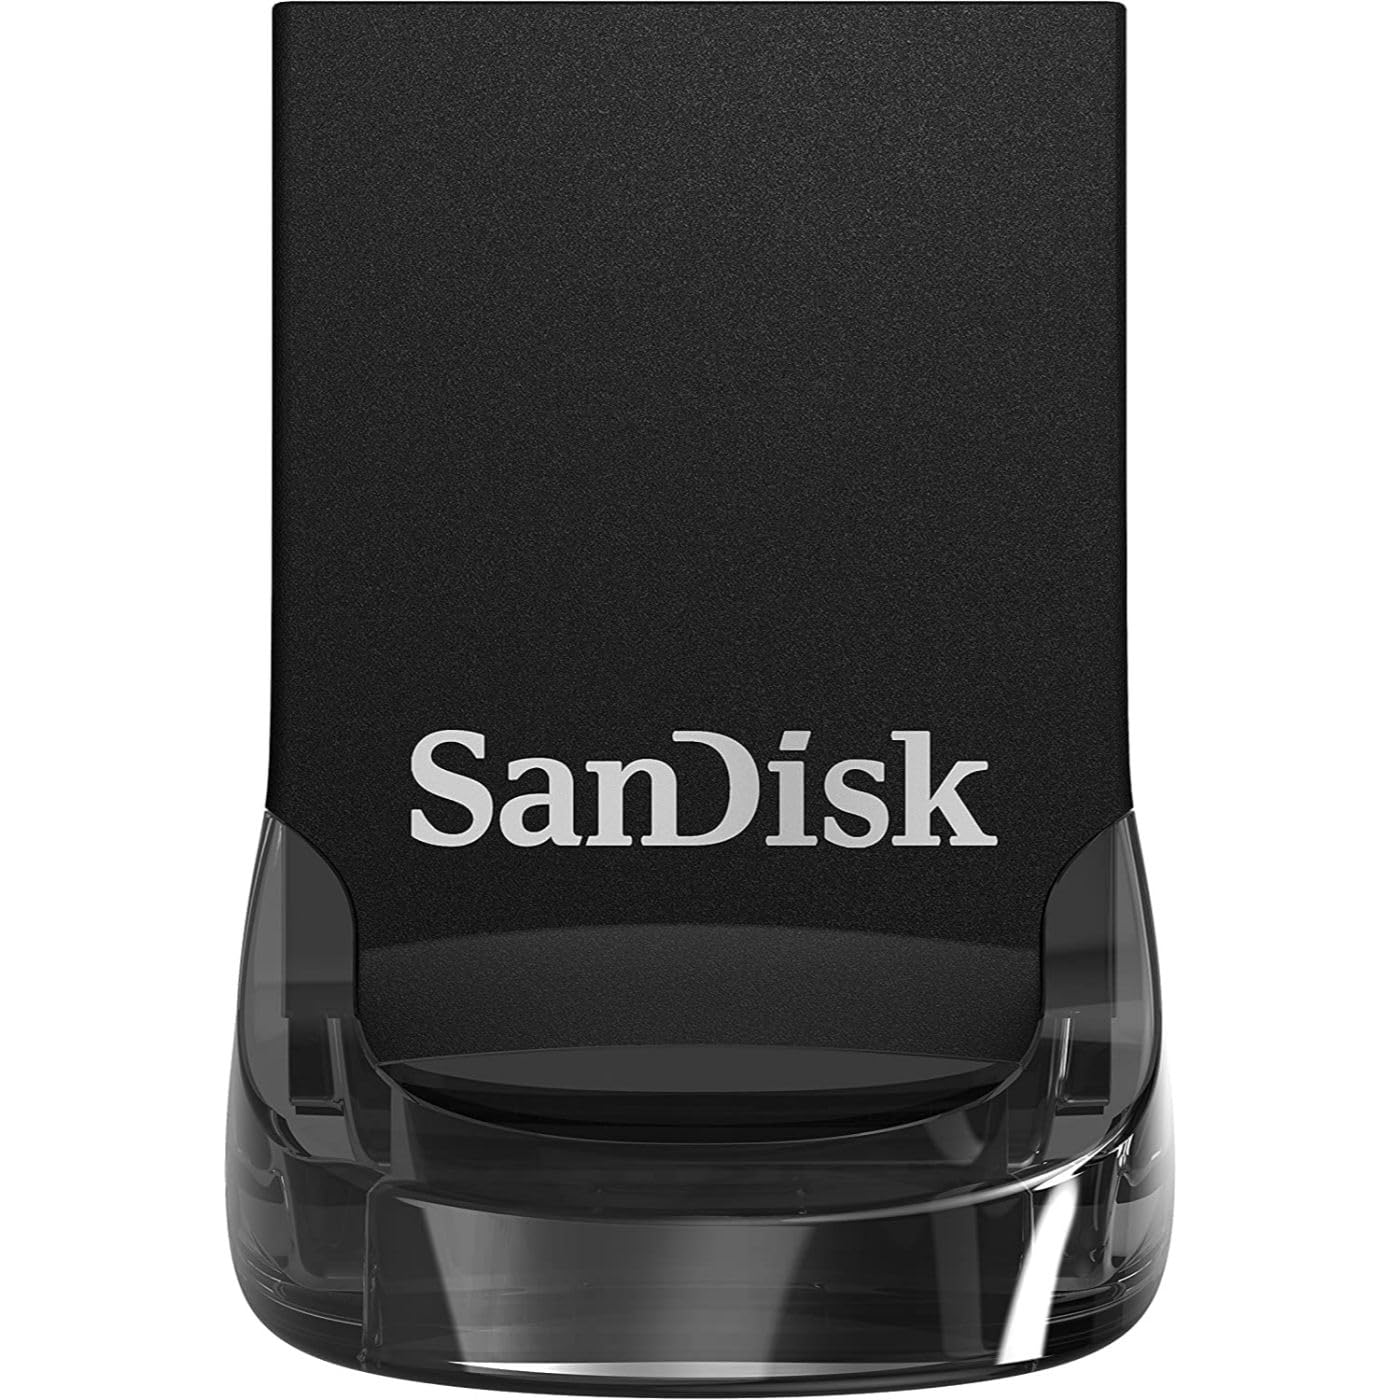 SanDisk 256GB Ultra Fit USB 3.2 Gen 1 Flash Drive – Up to 400MB/s, Plug-and-Stay Design - SDCZ430-256G-GAM46